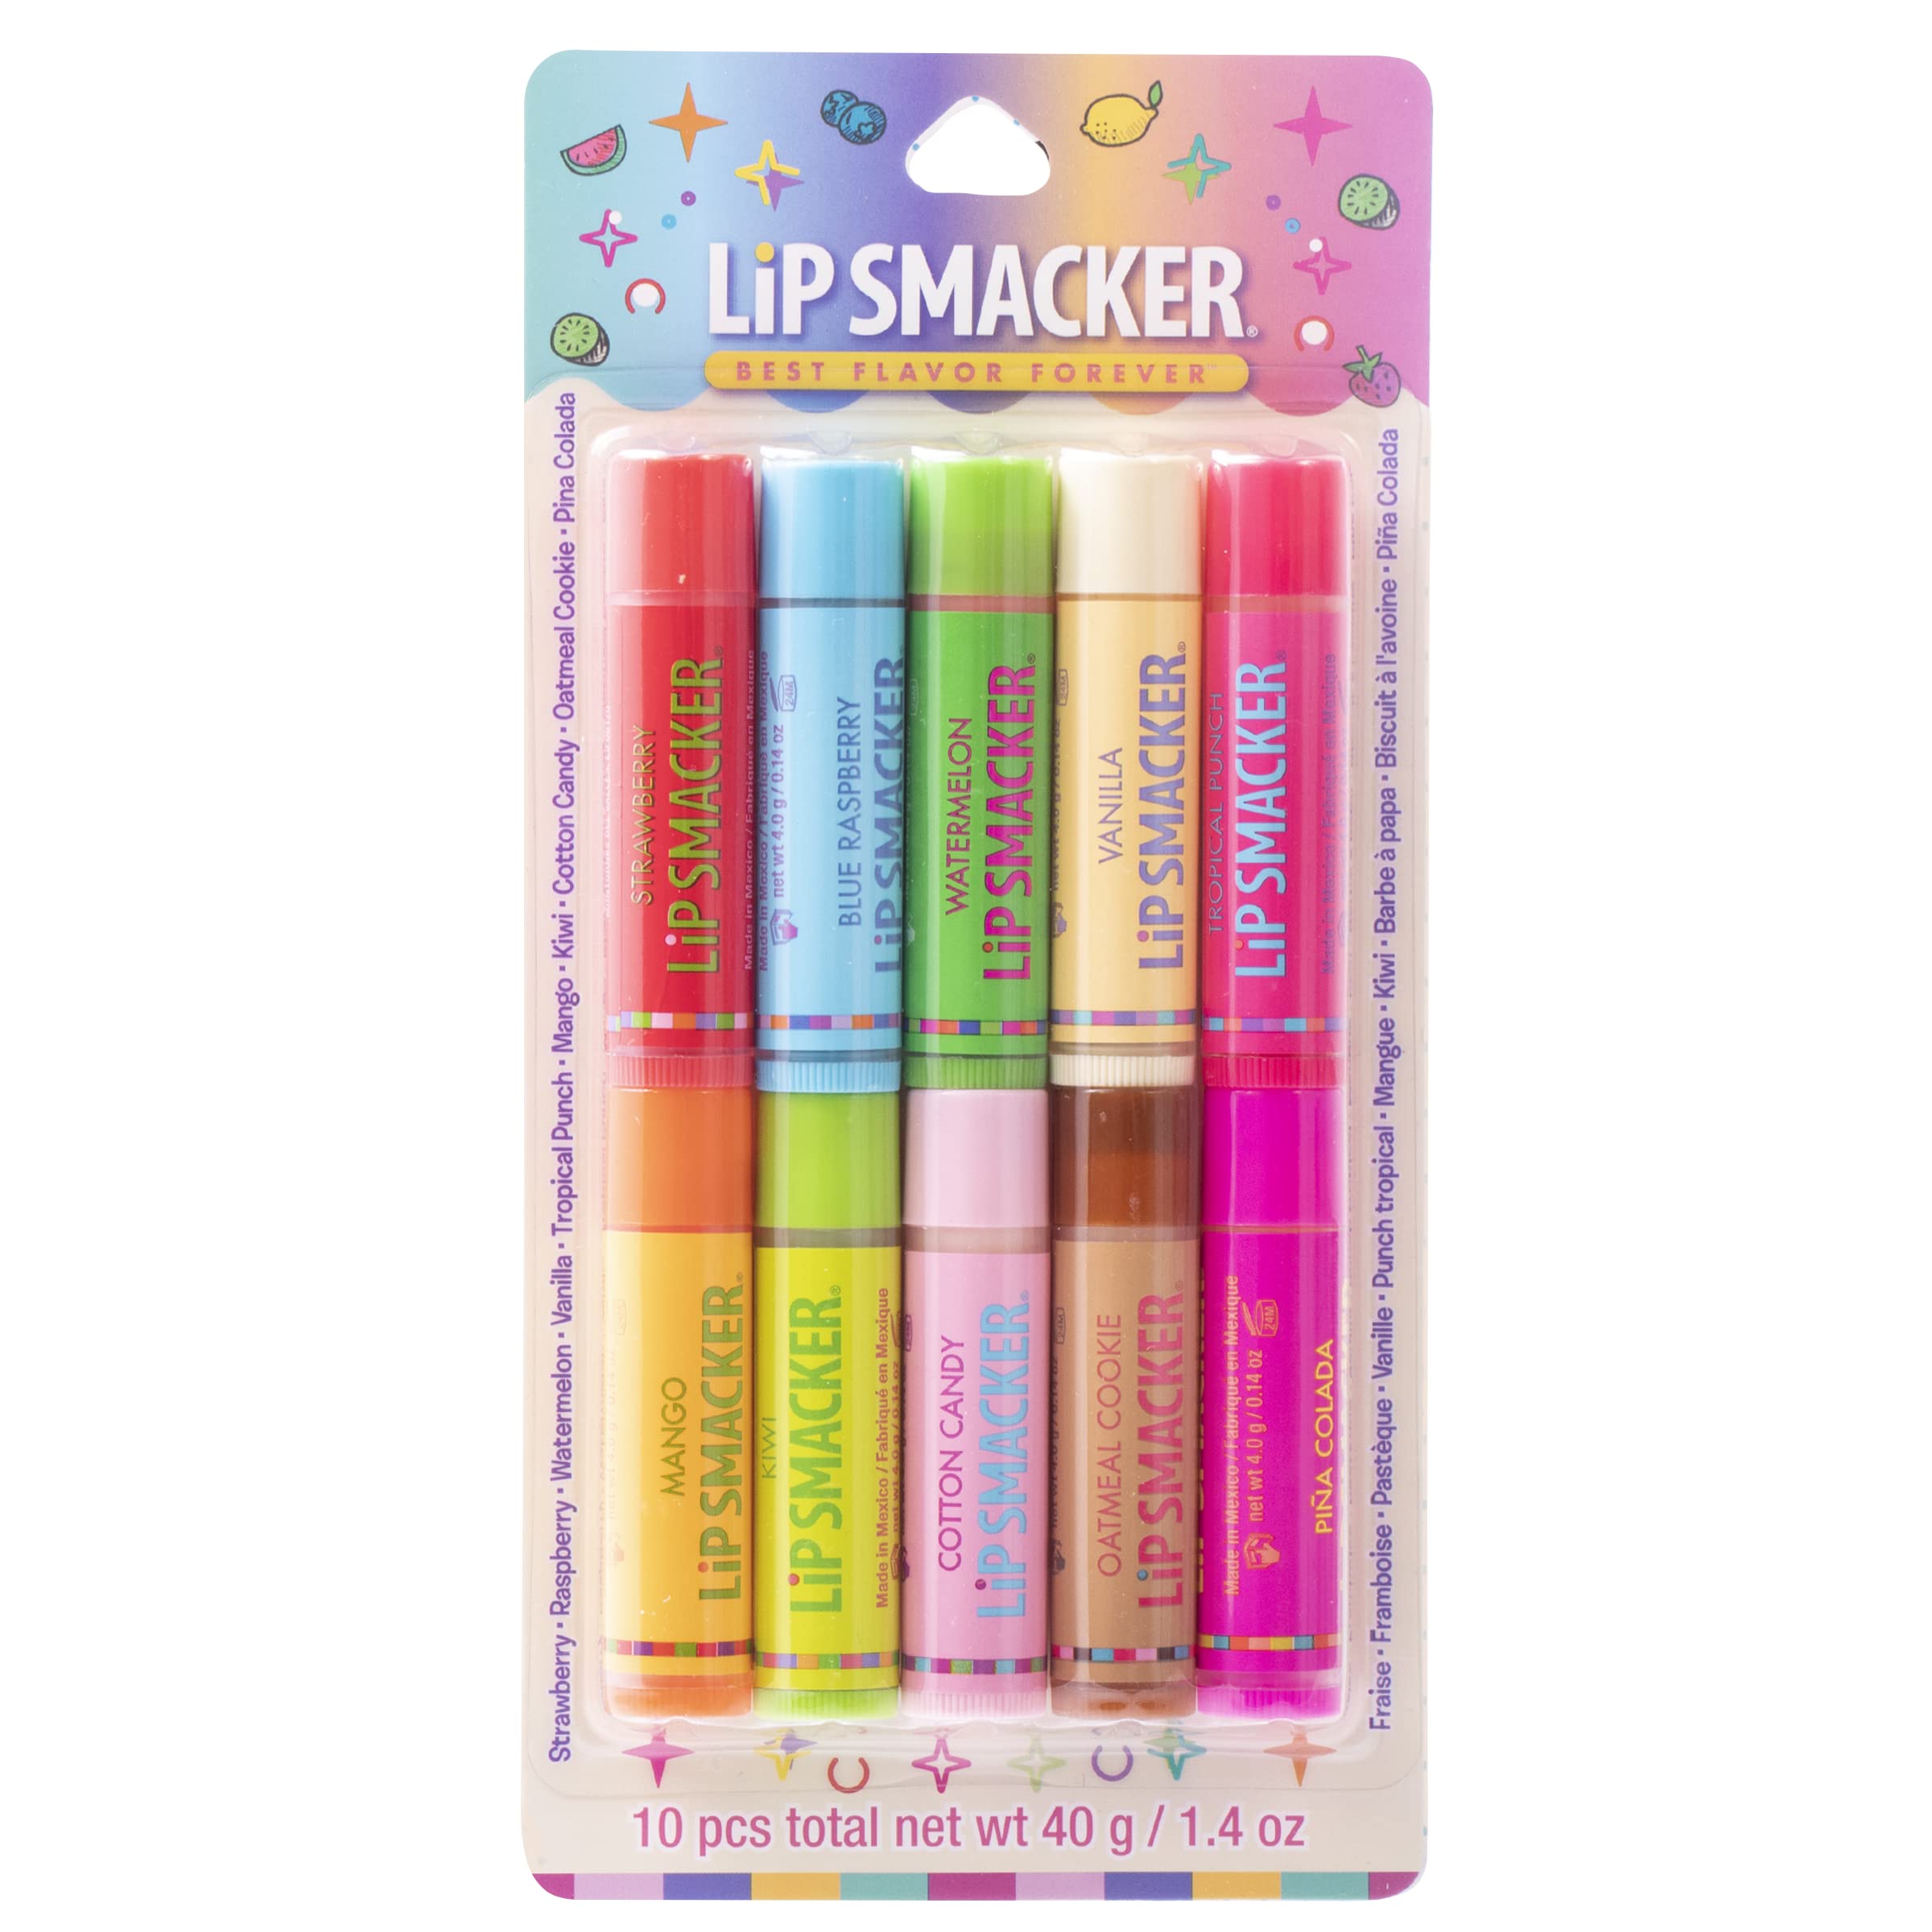 10-Count Lip Smacker Original & Best Lip Balm Party Pack (Oatmeal Cookie, Vanilla, Mango, Watermelon & More) $8.25 w/ S&S + Free Shipping w/ Prime or $25+